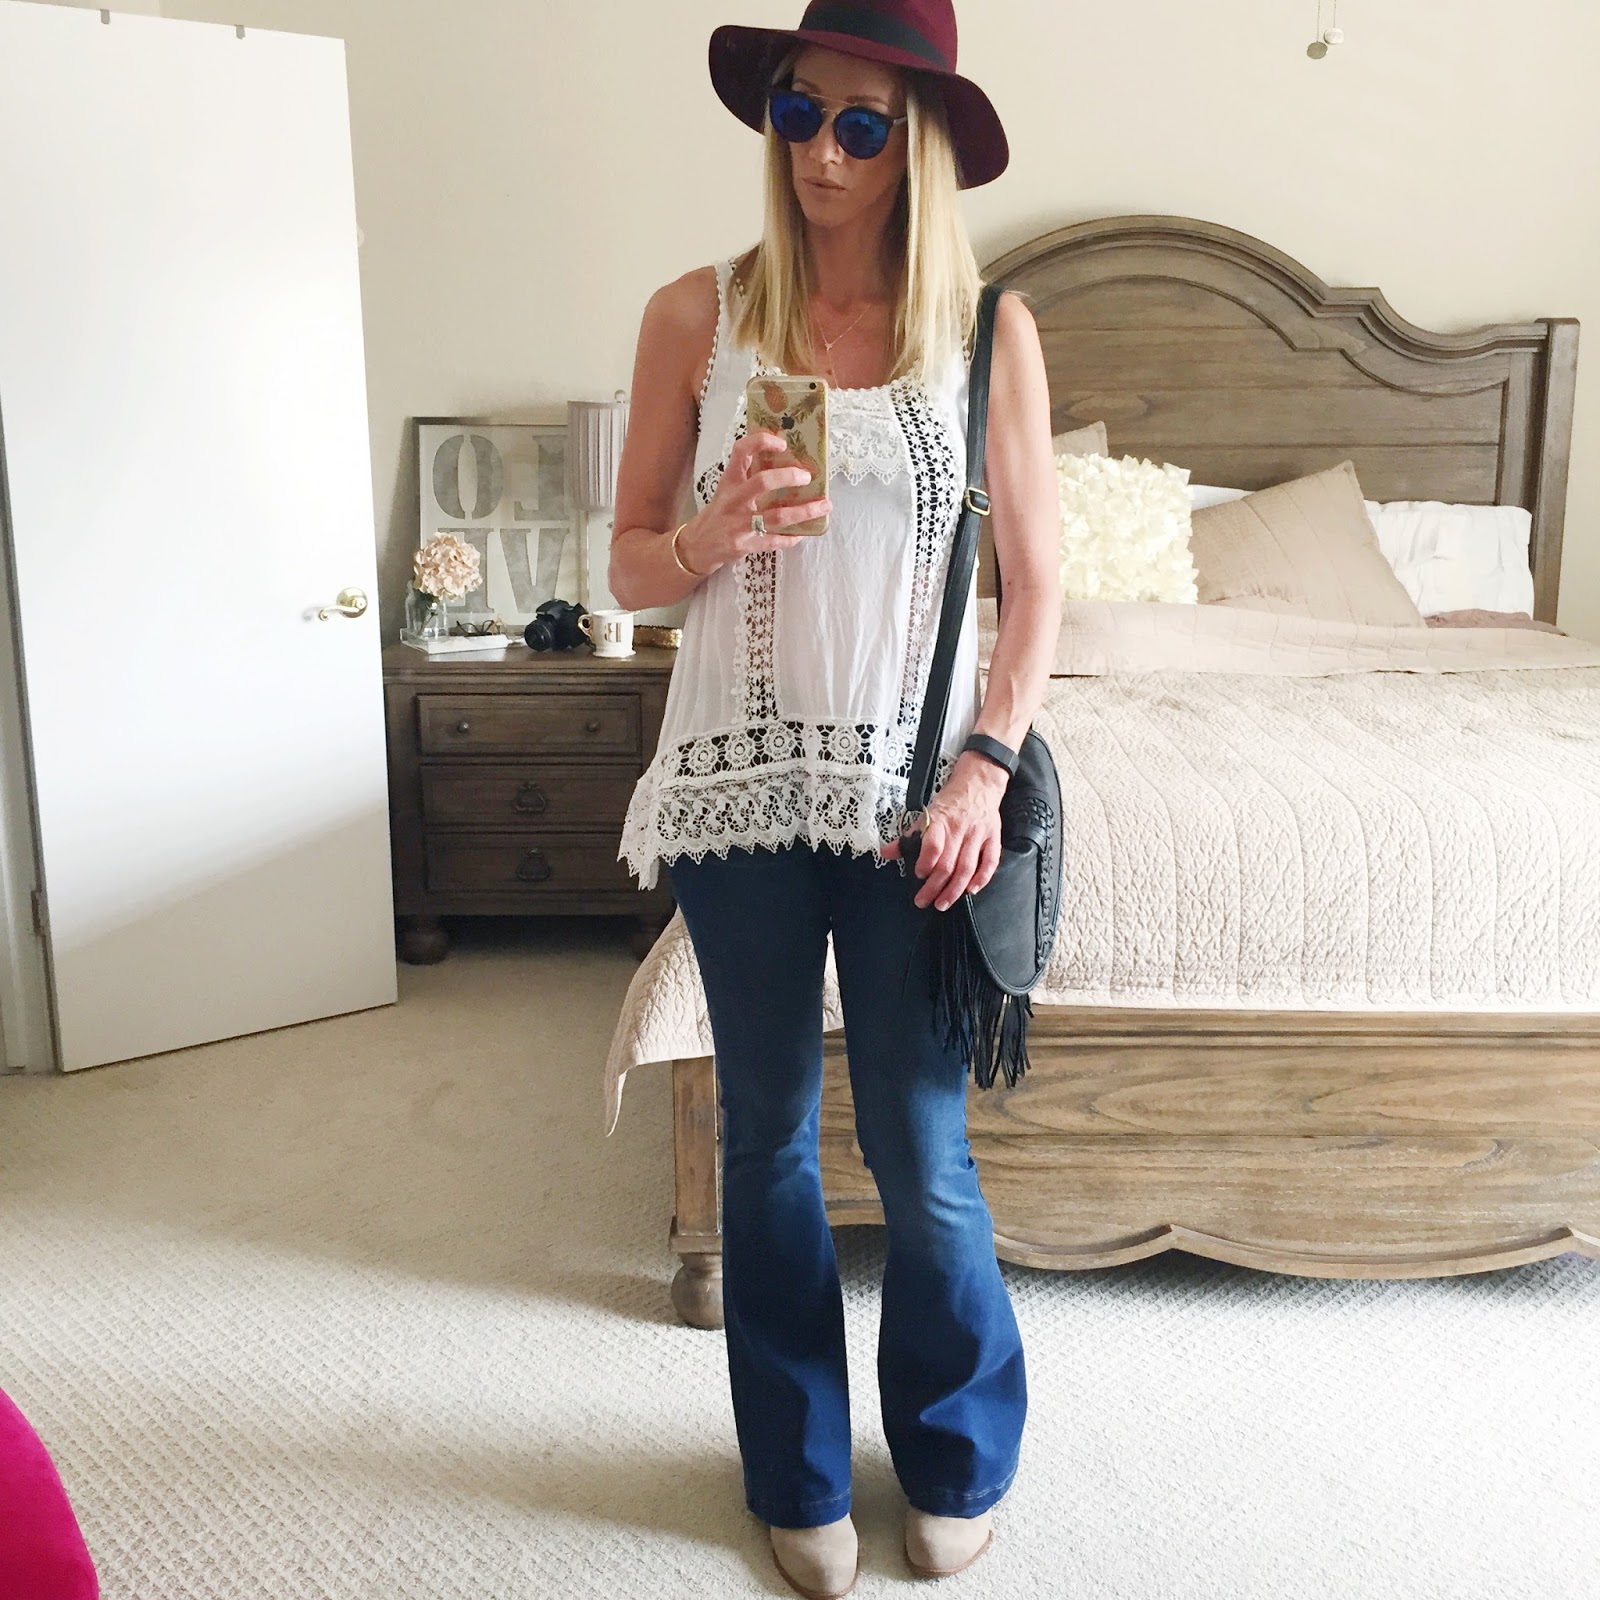 The Parlor Girl: 3 simple ways to wear flare jeans